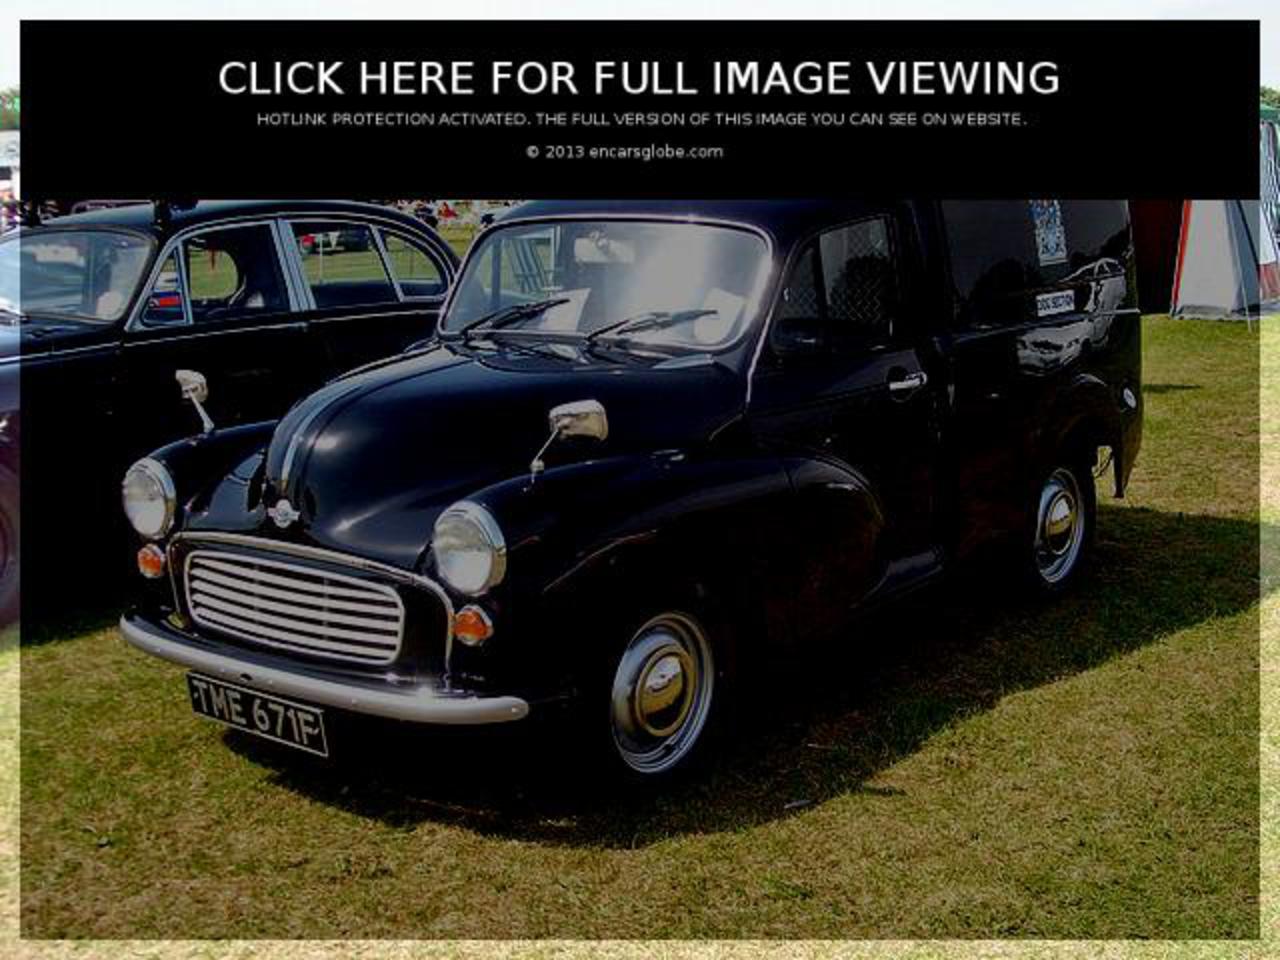 Morris 1000 Post Office Van Photo Gallery: Photo #02 out of 9 ...